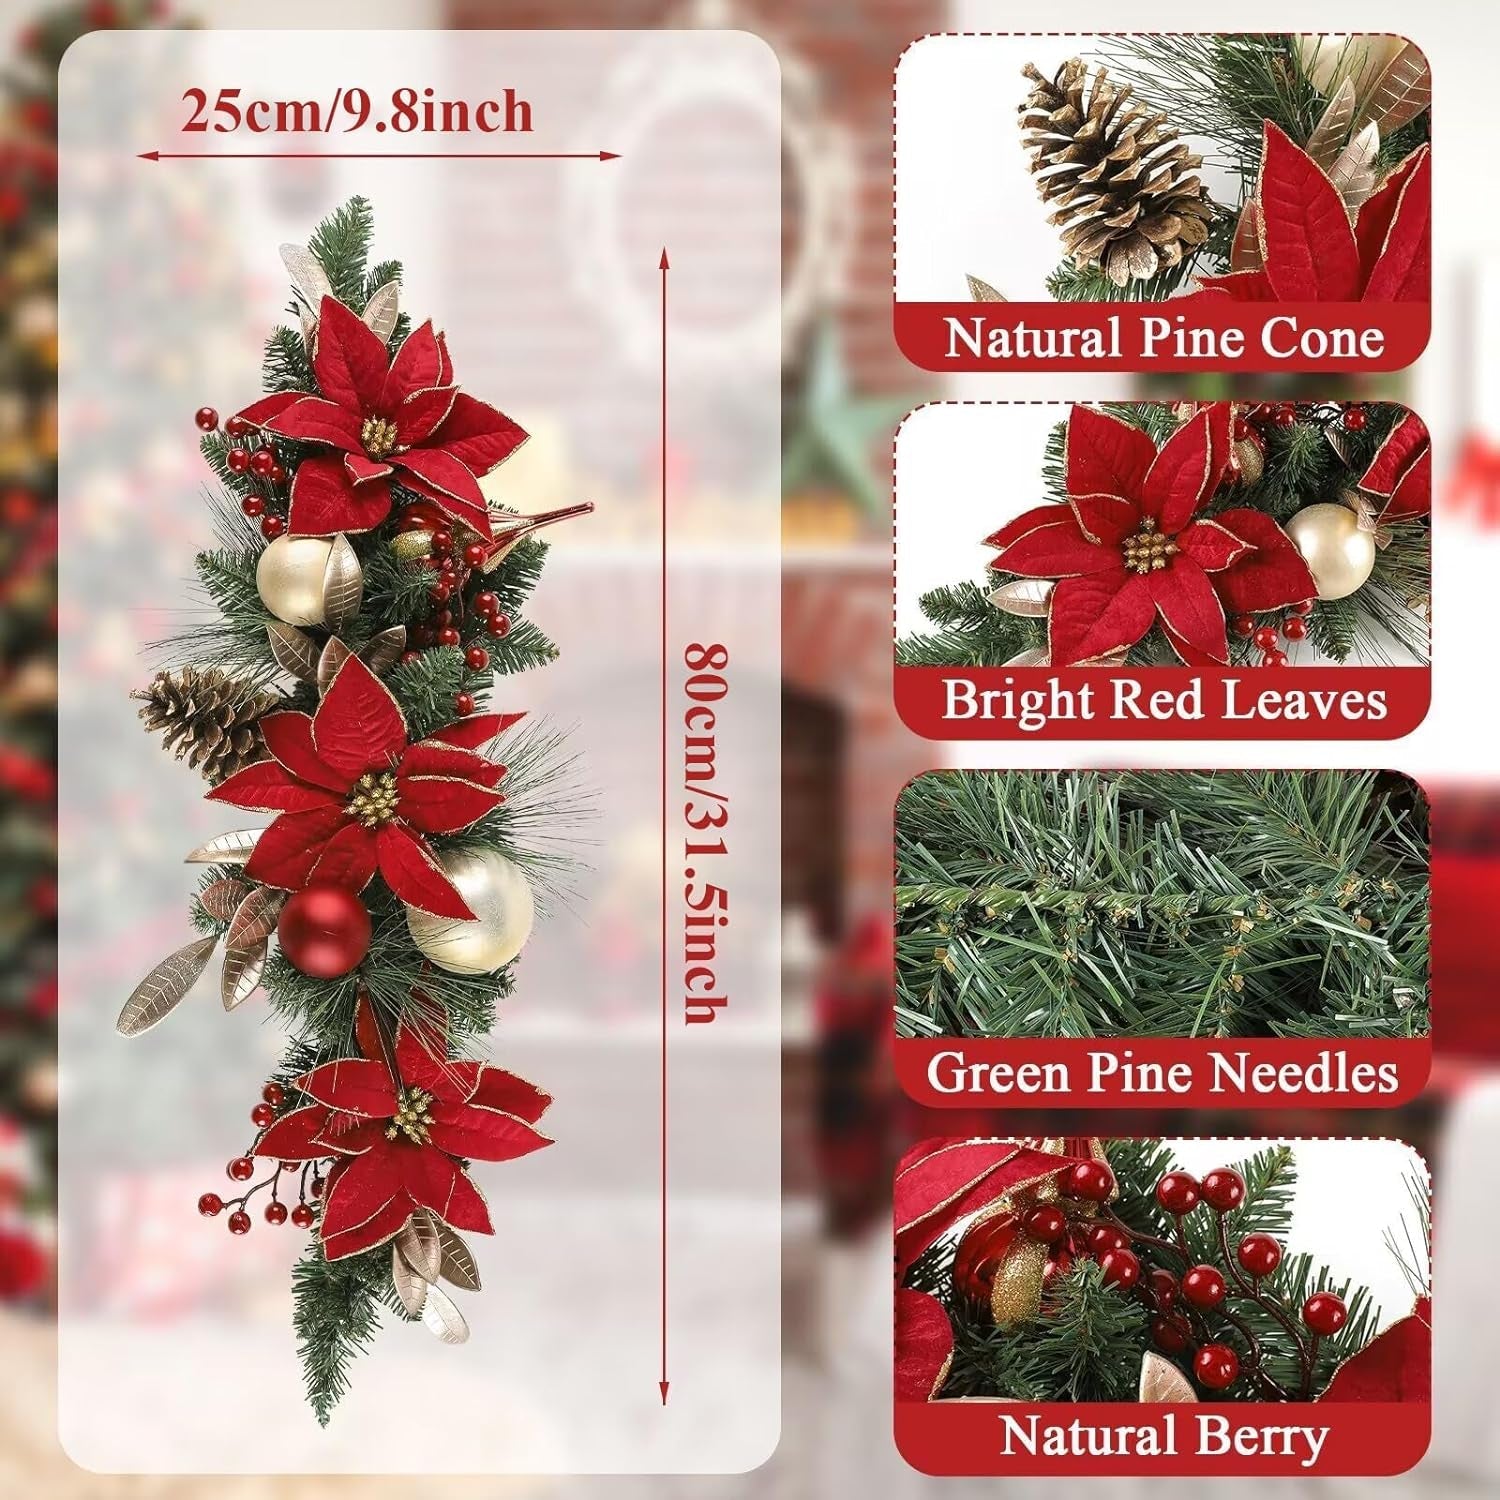 Bsmathom Artificial Christmas Swag, Christmas Mailbox Swag Decoration, 31.5" Front Door Hanging Home Decoration with Pinecones and Berries for Front Door Stairway Window Shelf Xmas Decor